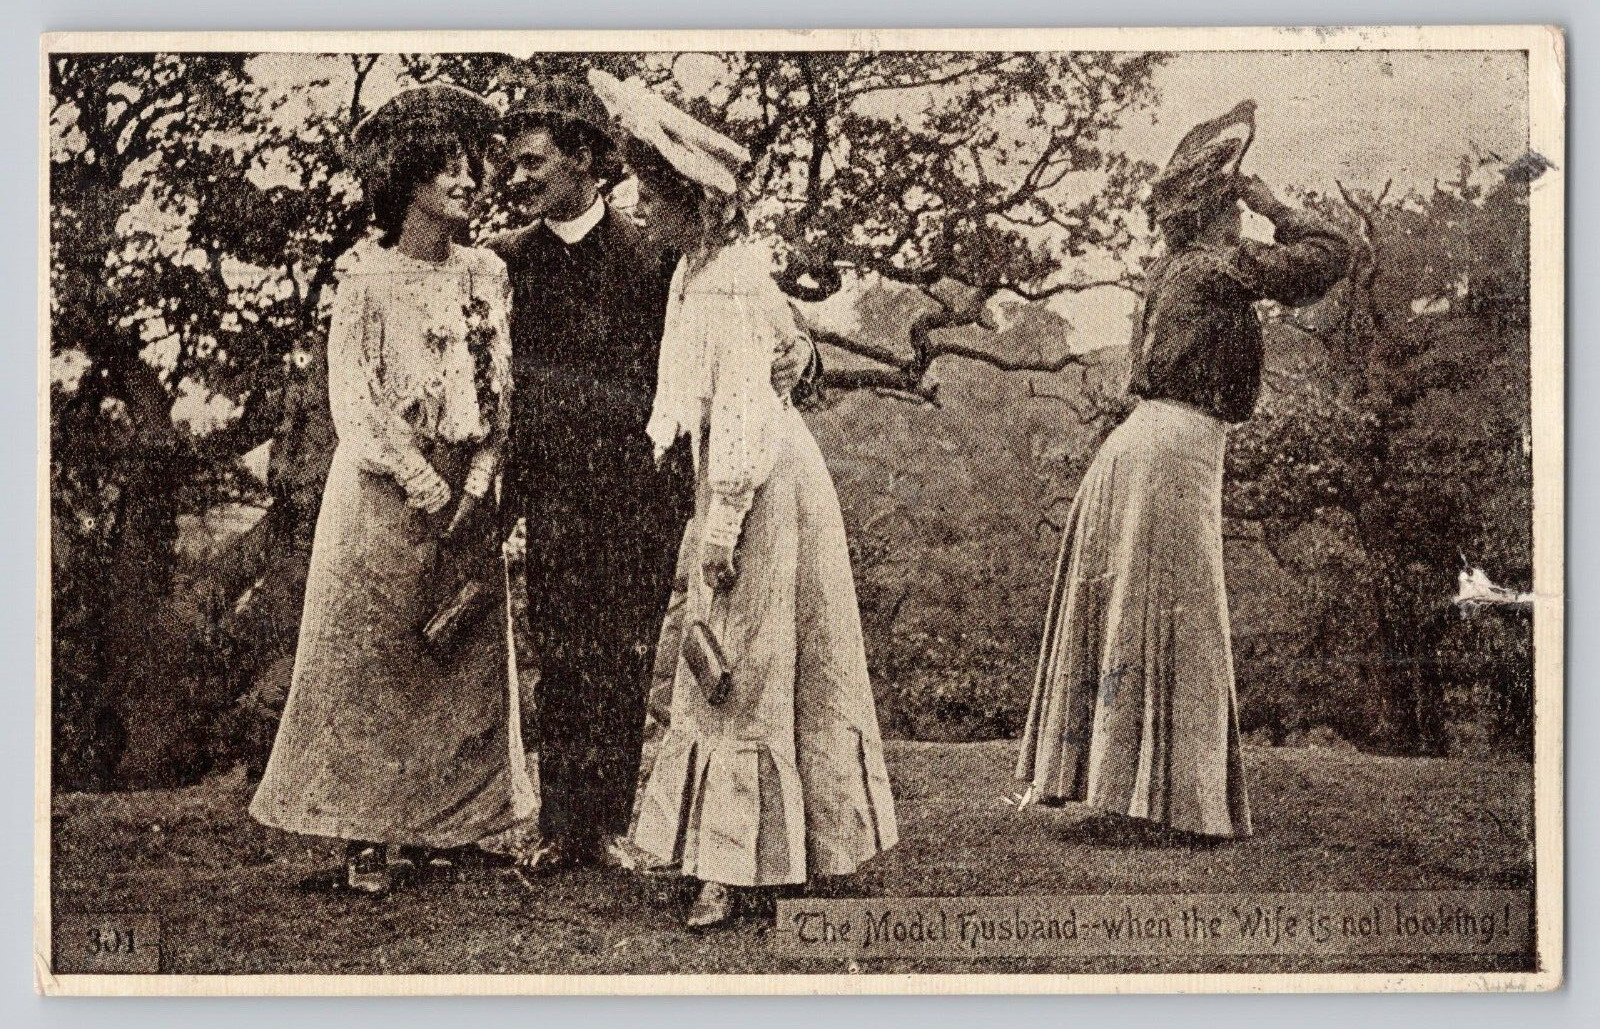 Postcard The model Husband when the wife is not looking ... Humor Romance c 1907